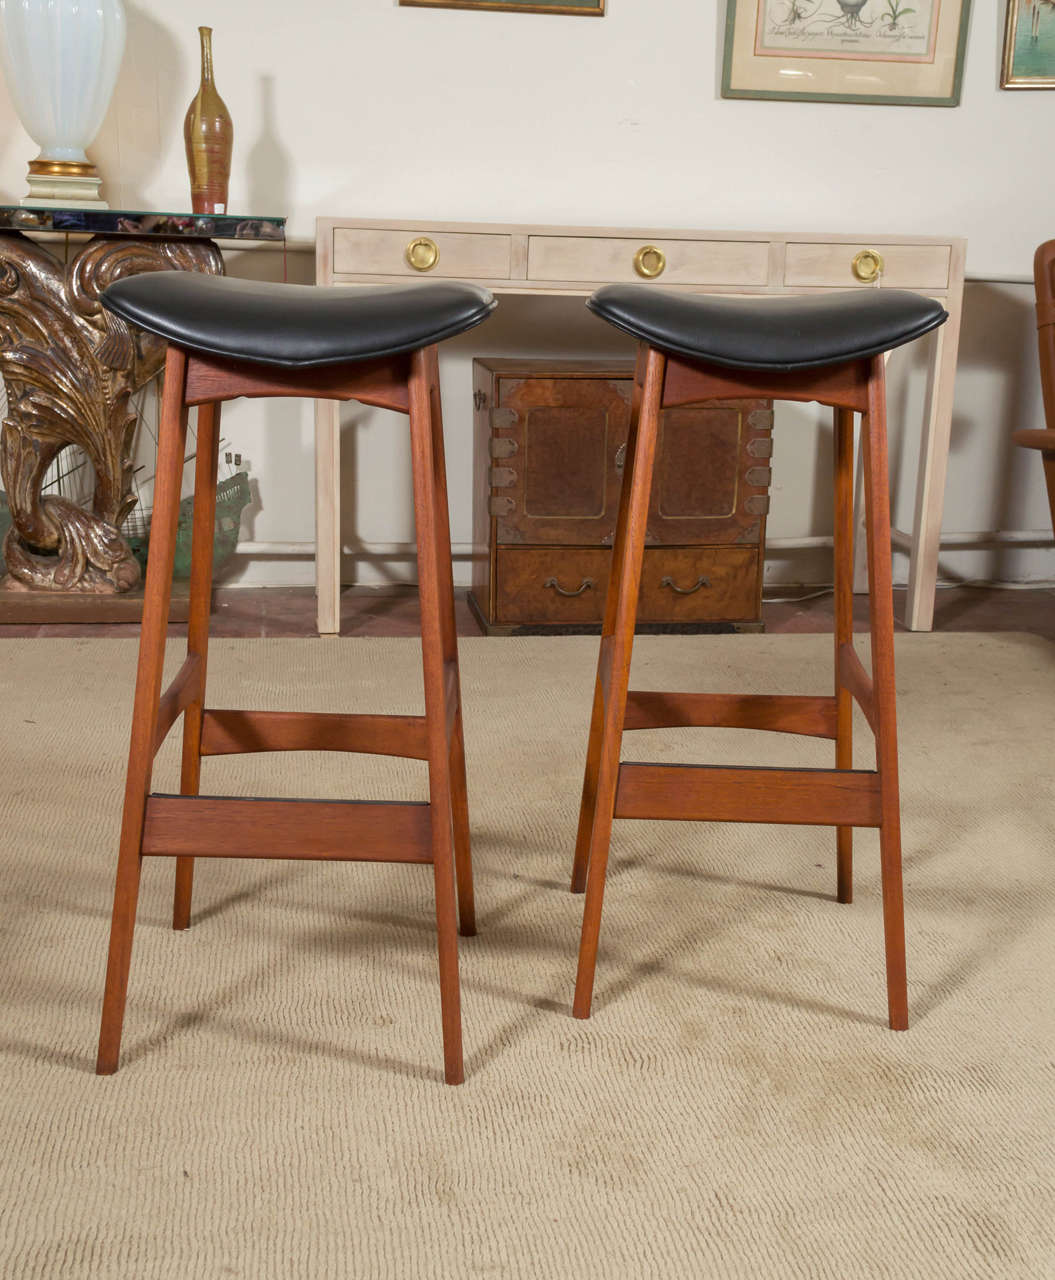 A circa 1950s pair of Teak Danish modern bar stools, with Black leather seats. Designed by Johannes Andersen. Seats have new foam and leather.